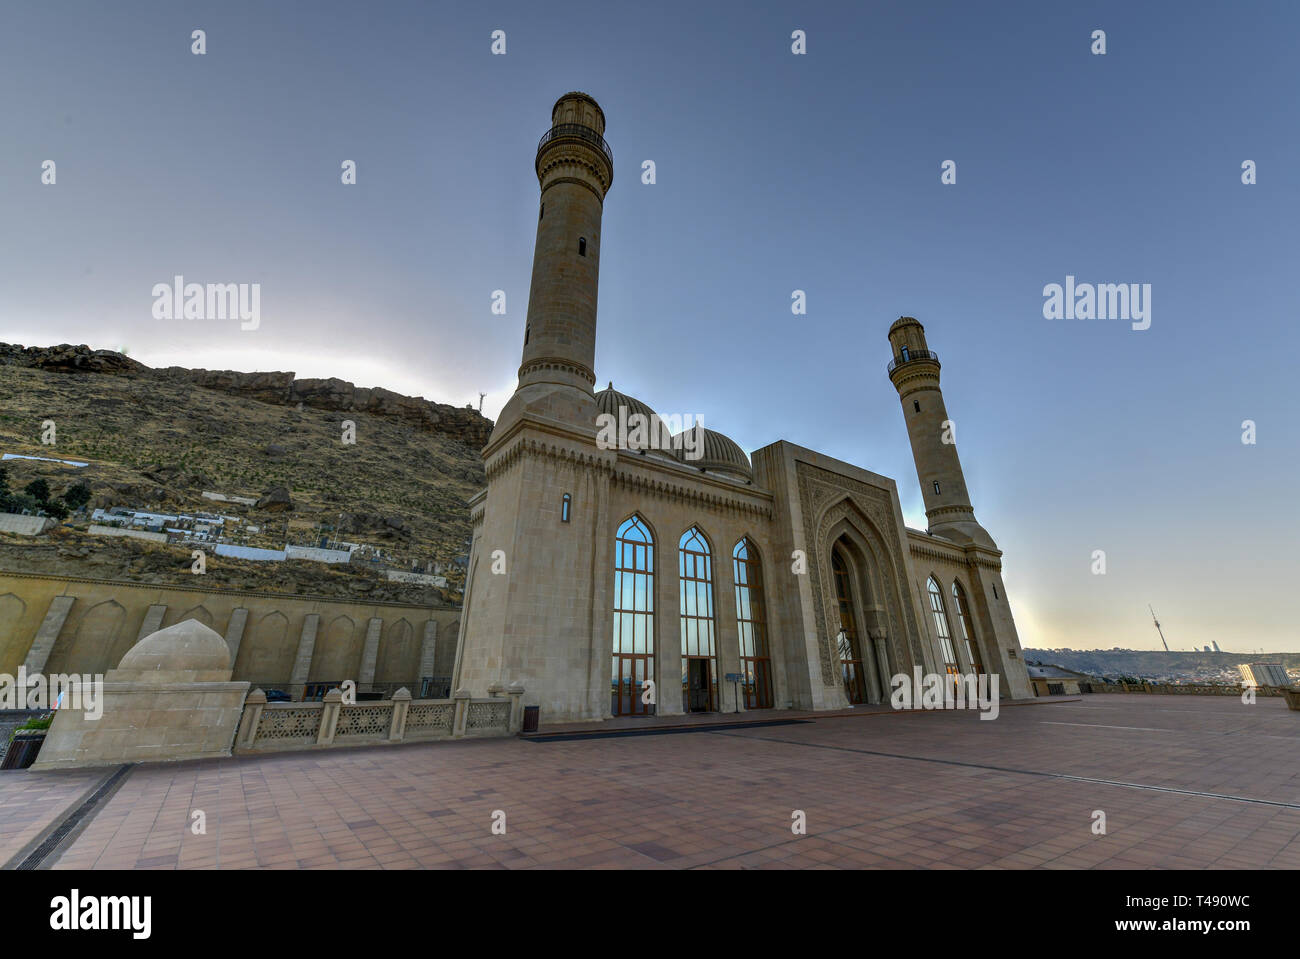 The Bibi-Heybat Mosque is a historical mosque in Baku, Azerbaijan. The existing structure, built in the 1990s, is a recreation of the mosque with the  Stock Photo